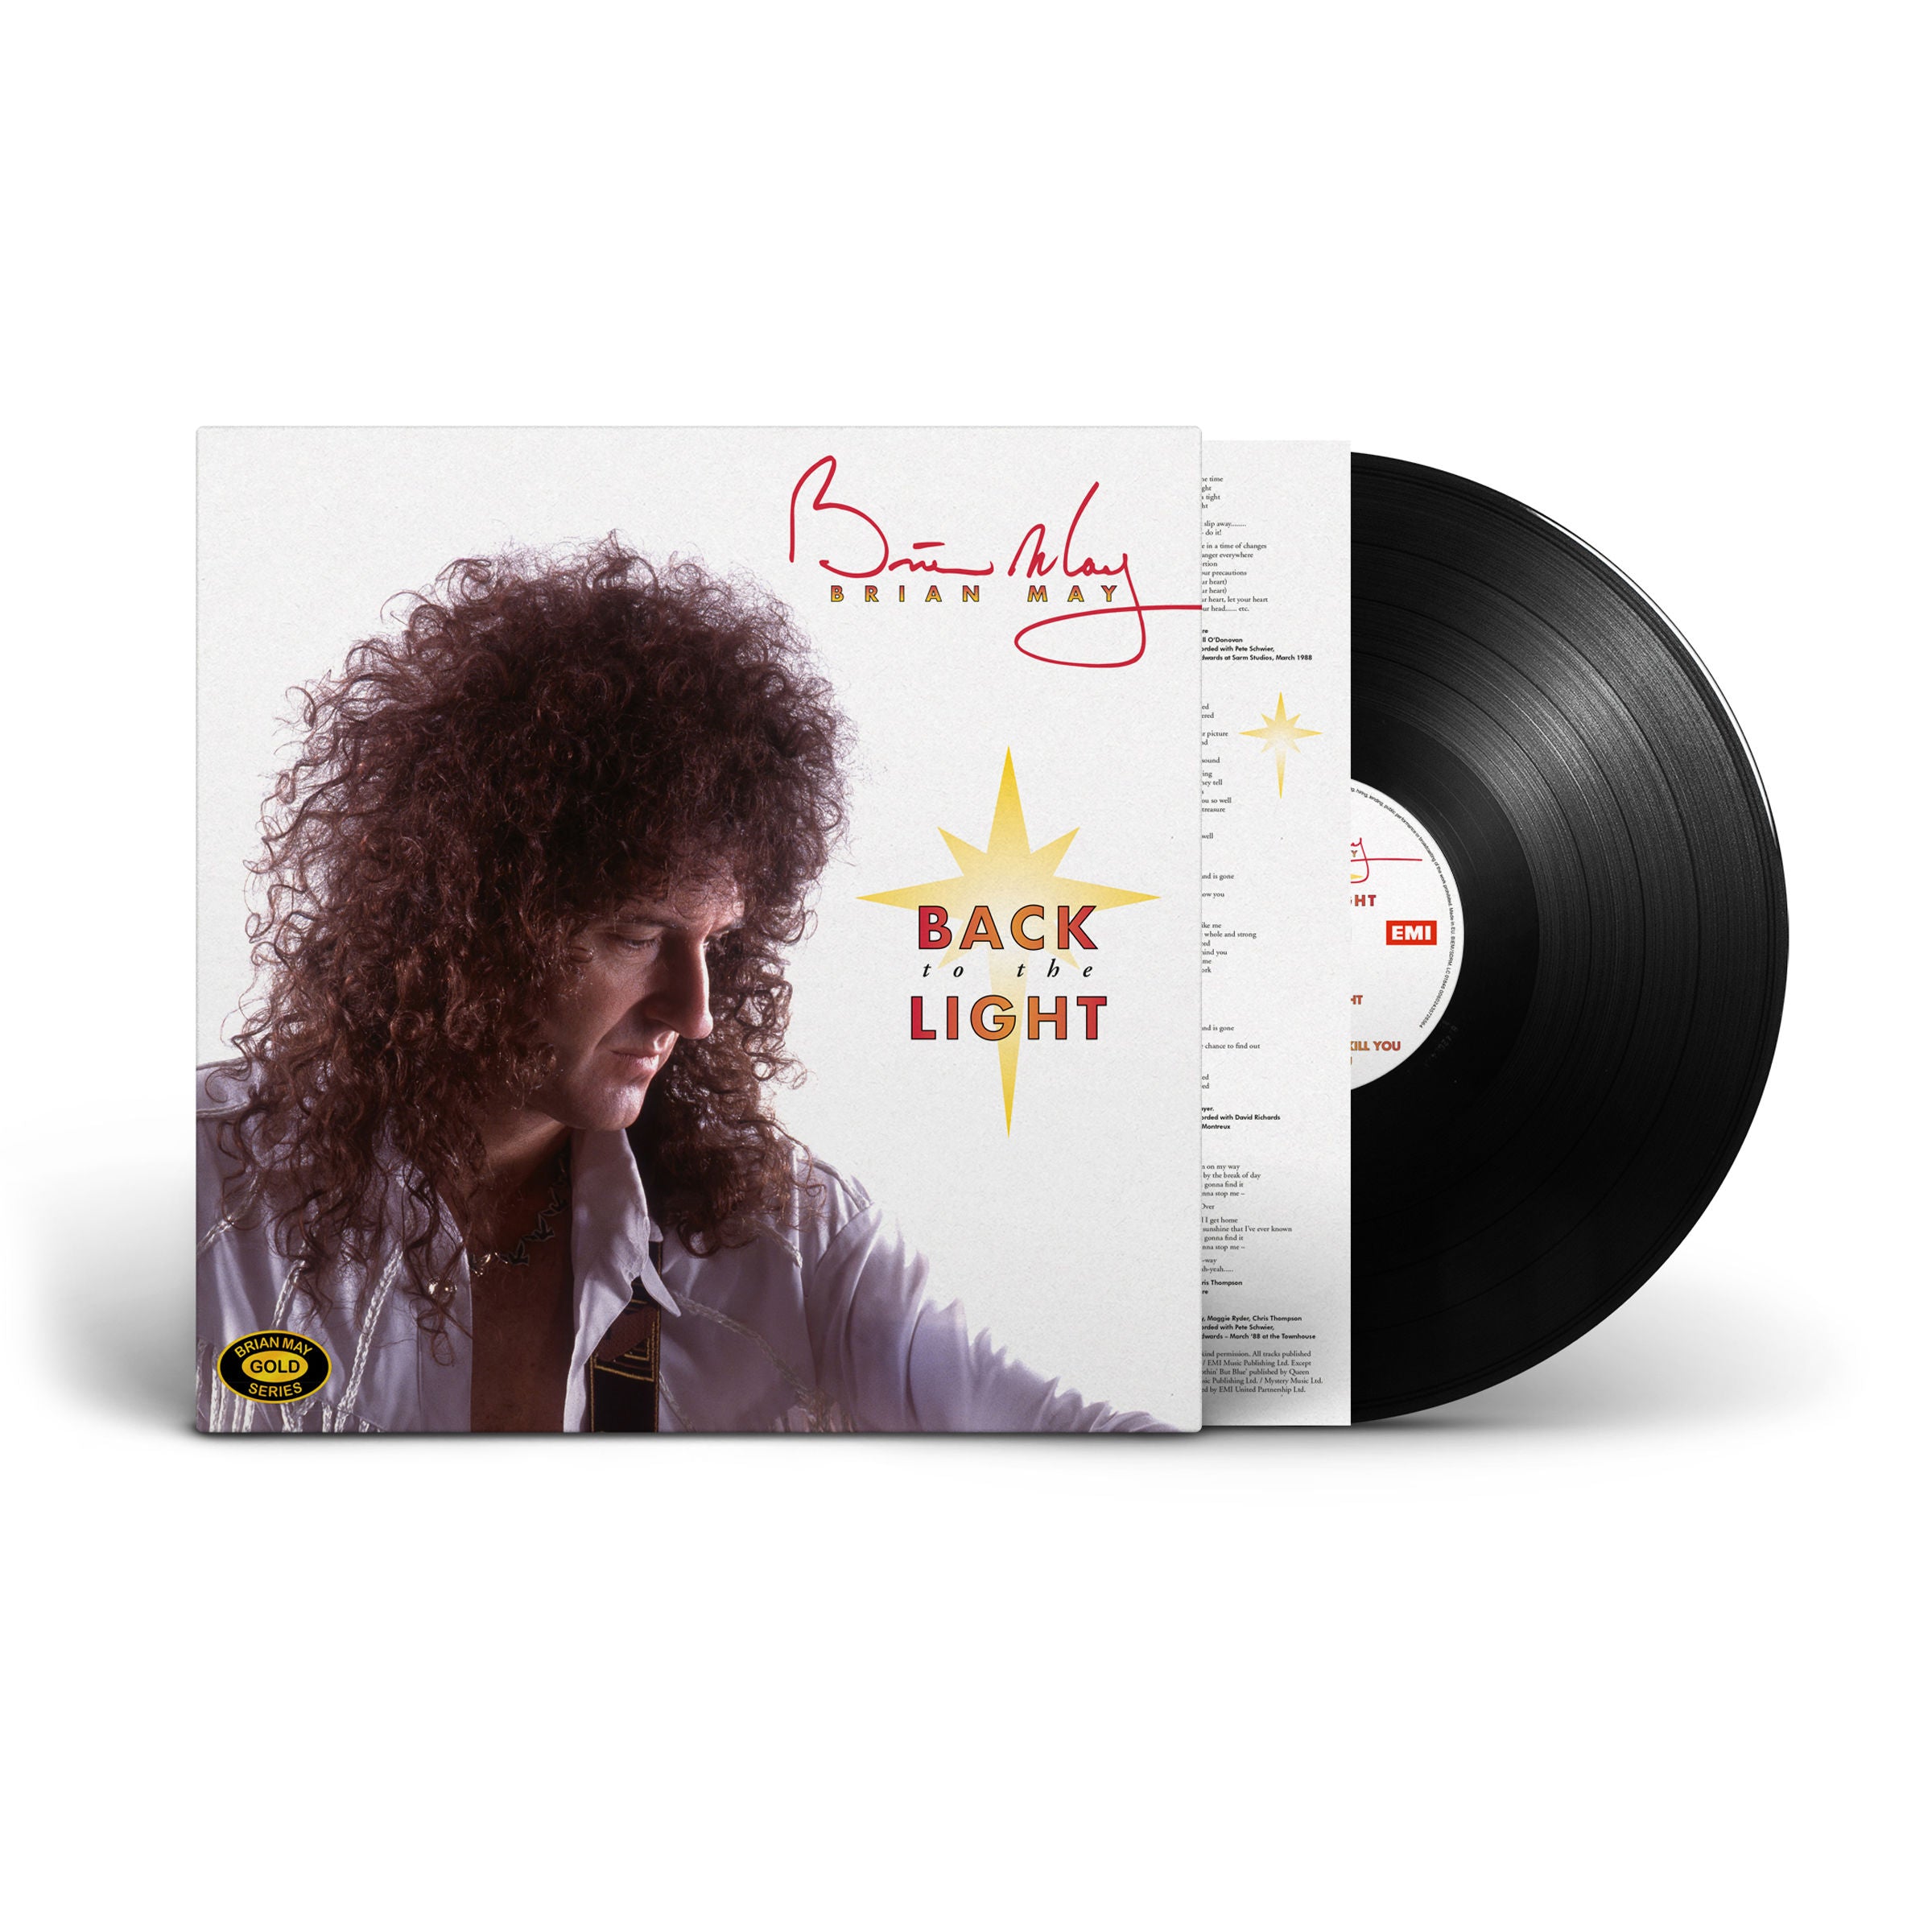 Brian May - Back To The Light: Vinyl LP